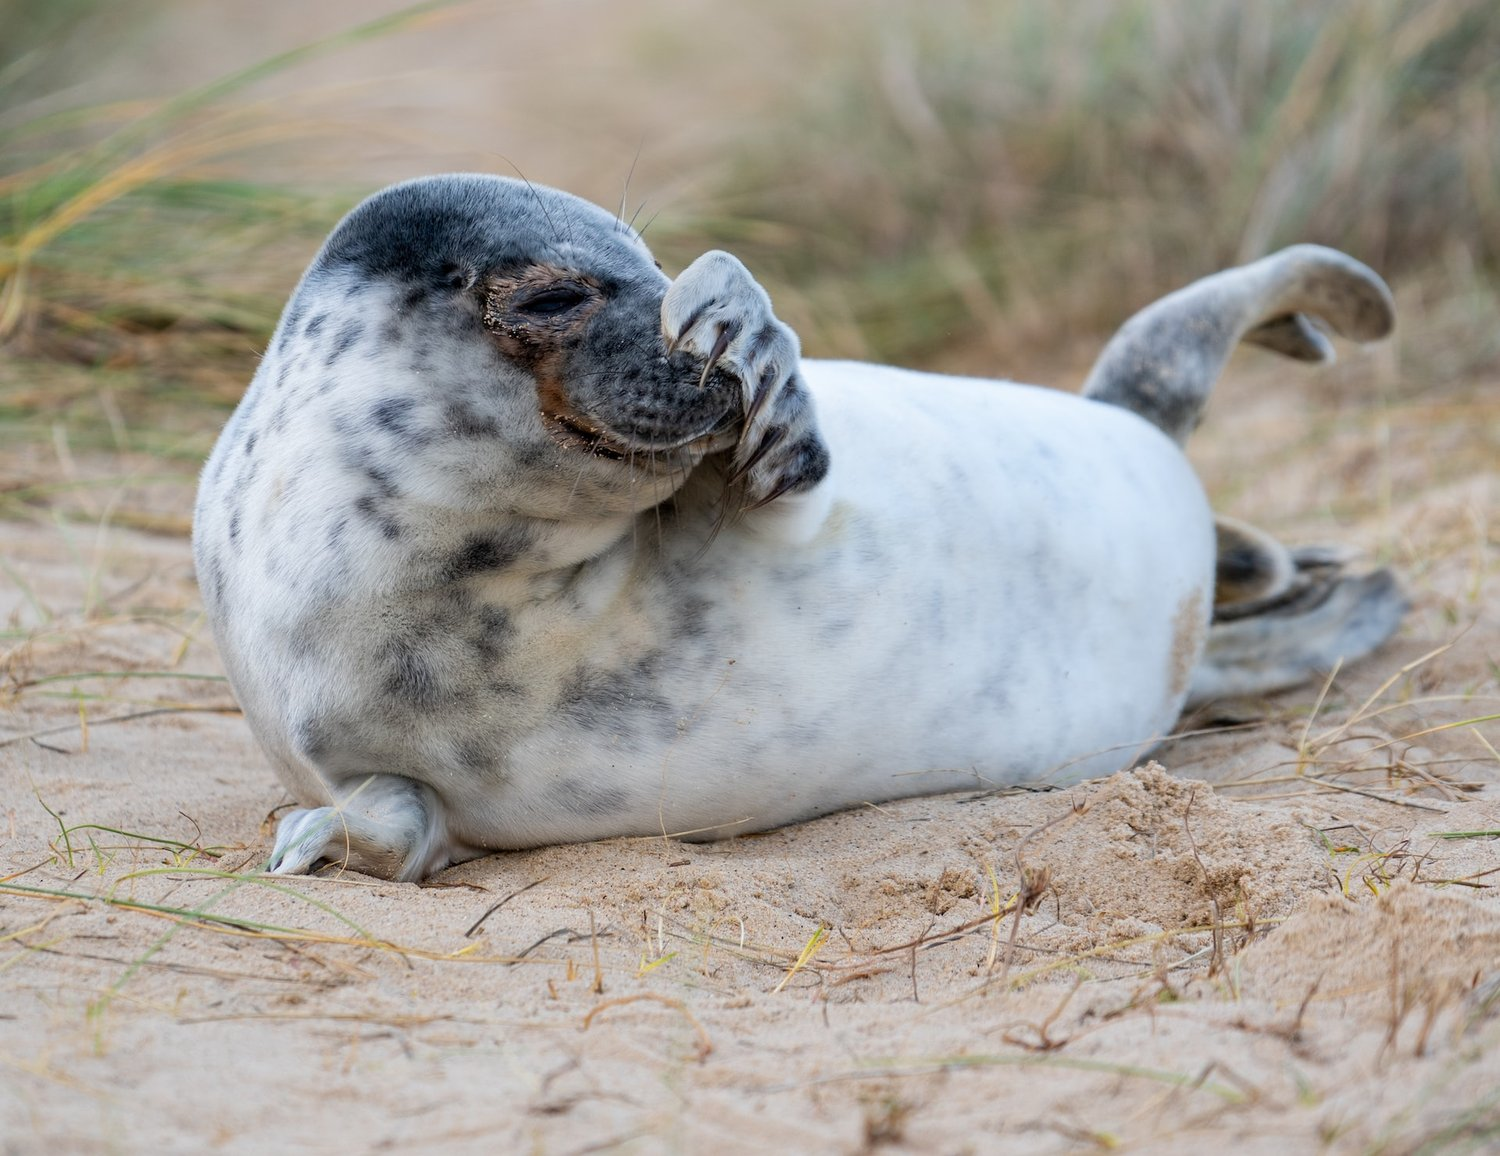 Hunstanton is s must view place for seals in Norfolk. It has a huge number, seen virtually all year